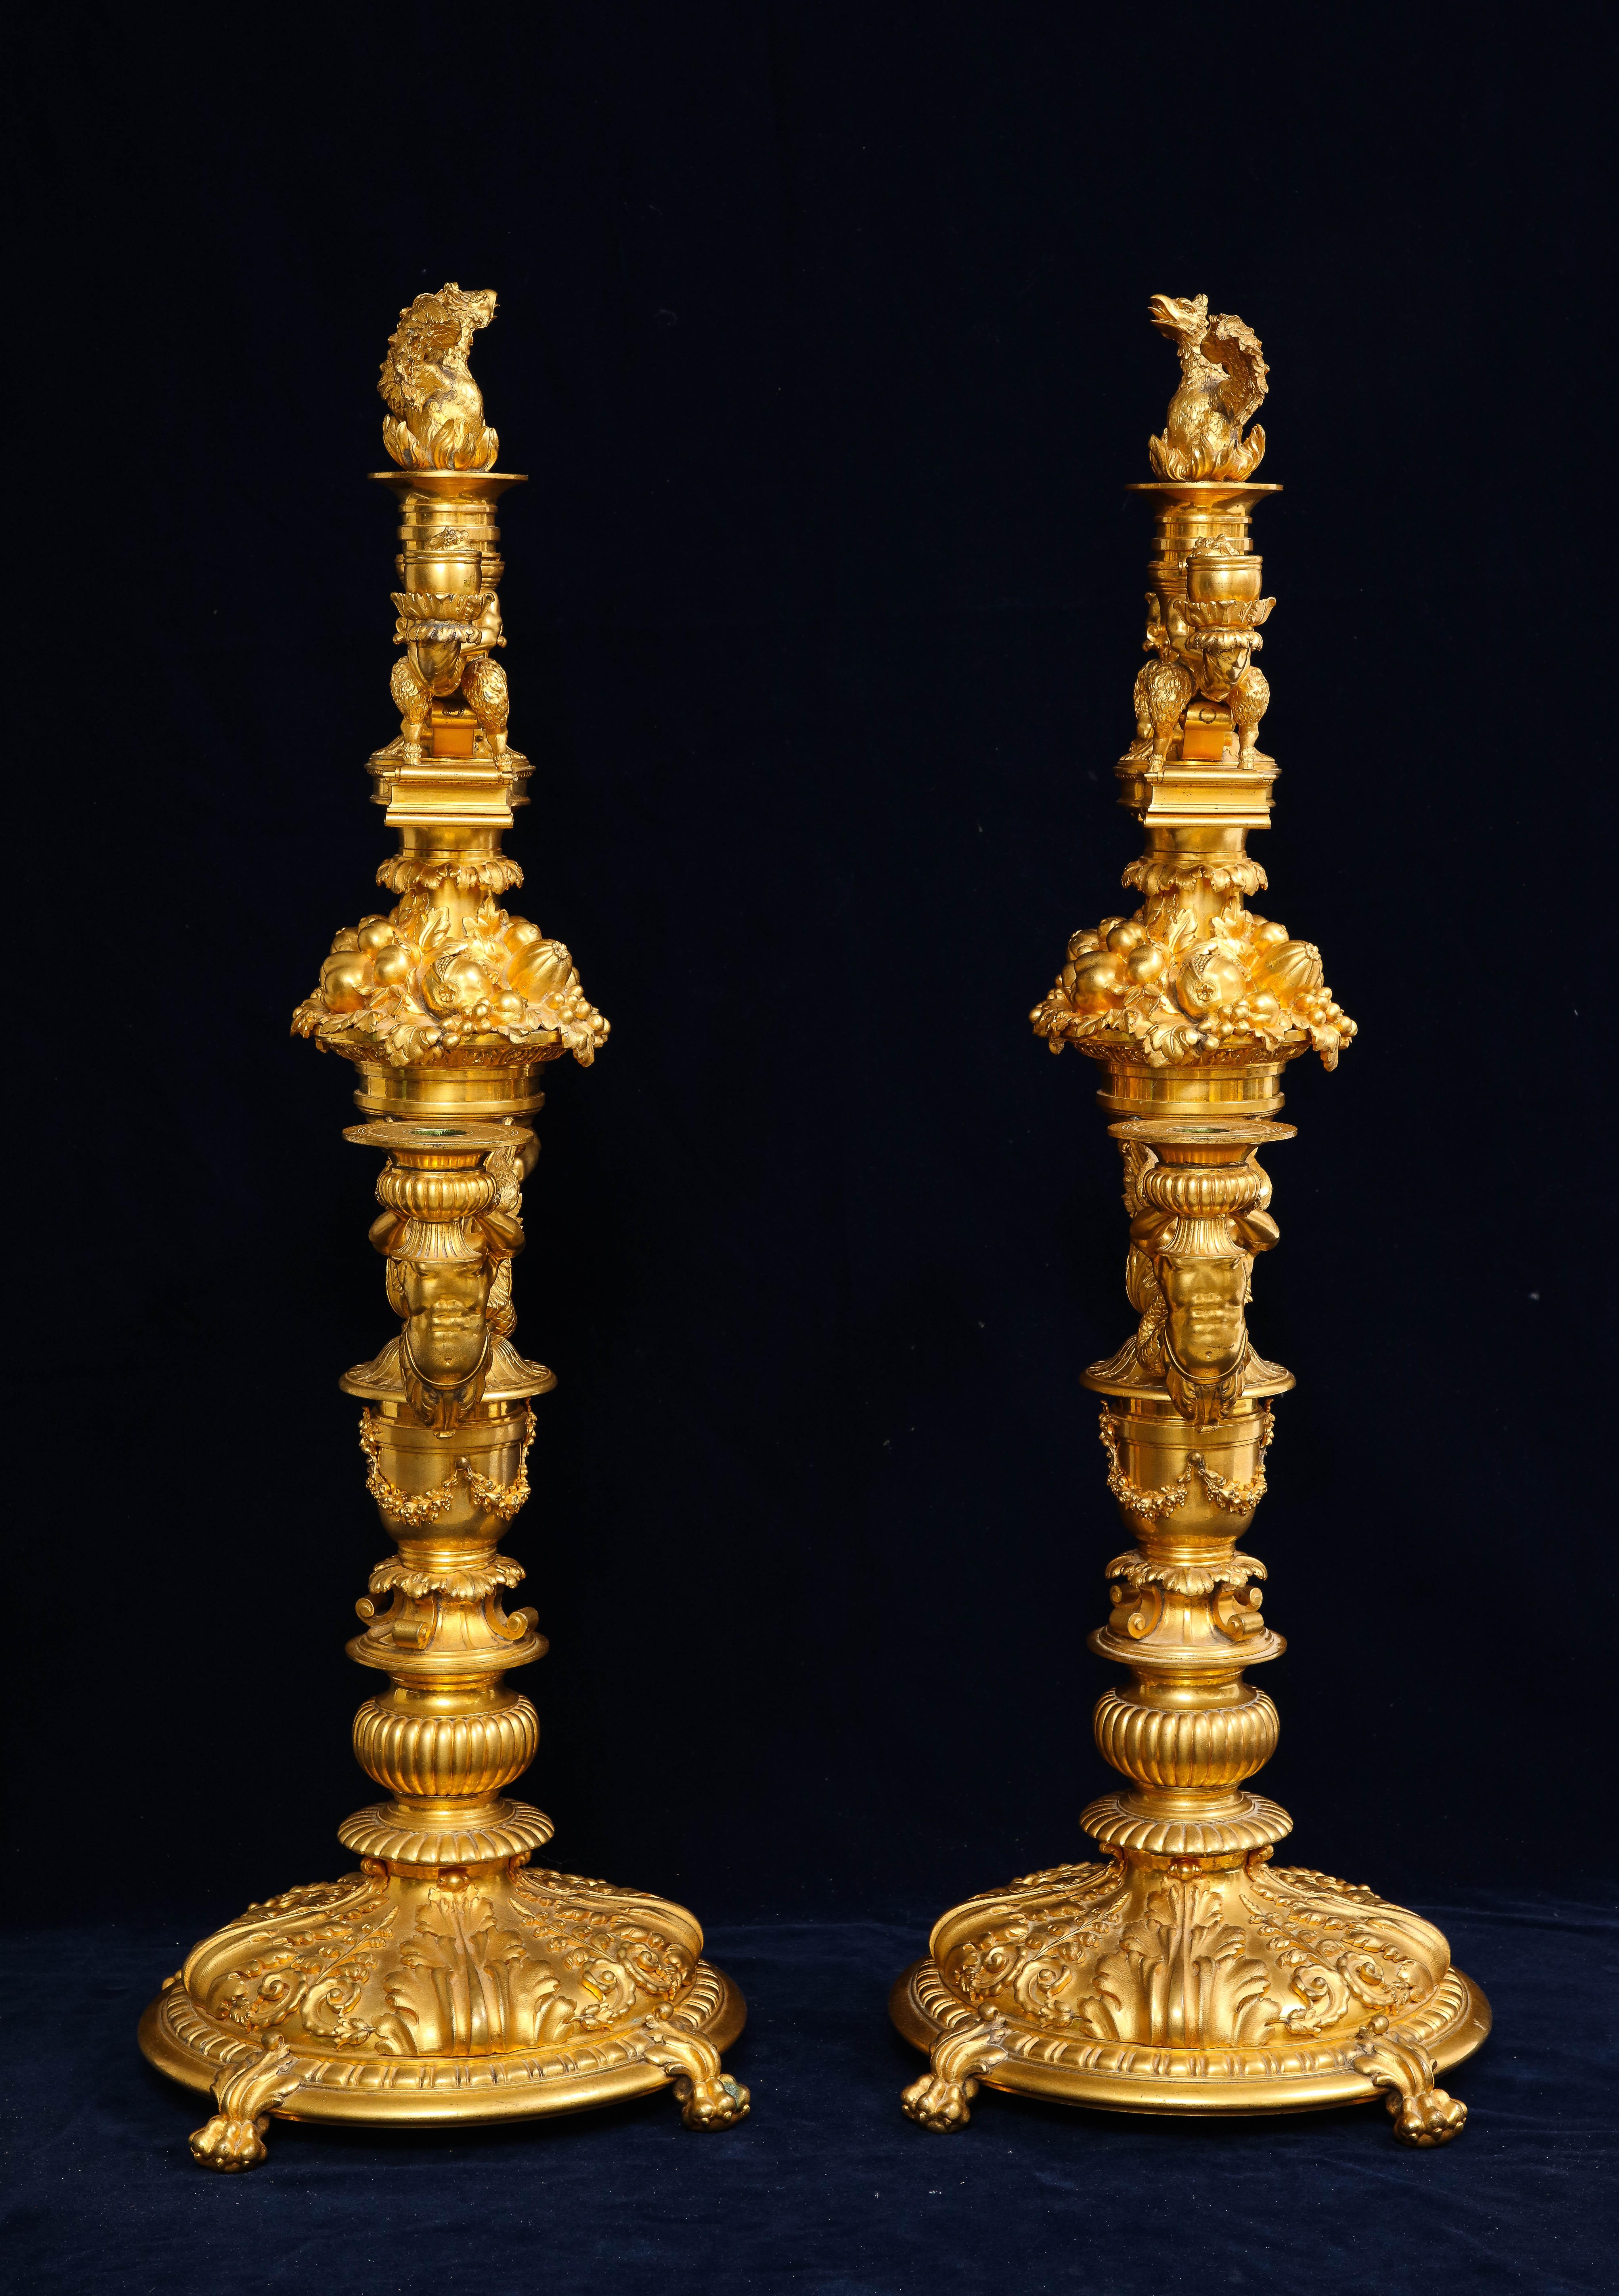 Late 19th Century Marvelous Pair of 19th C. French Ormolu Four Arm Candelabras, Signed P. Canaux For Sale